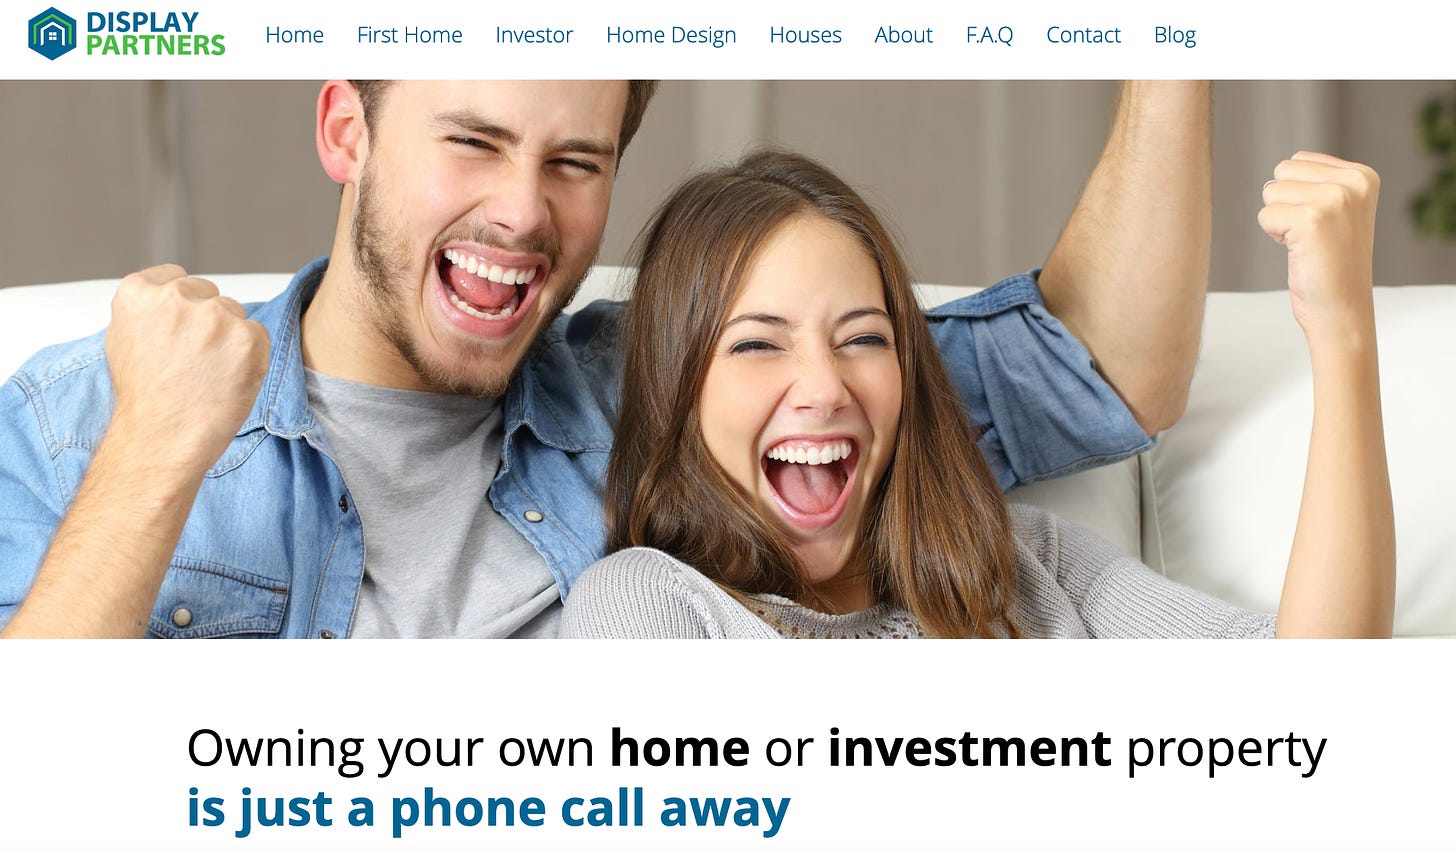 A screenshot from the website of Display Partners, a defunct real-estate scam. The picture depicts a young white man and woman sitting on a couch, each doing a fist-pump